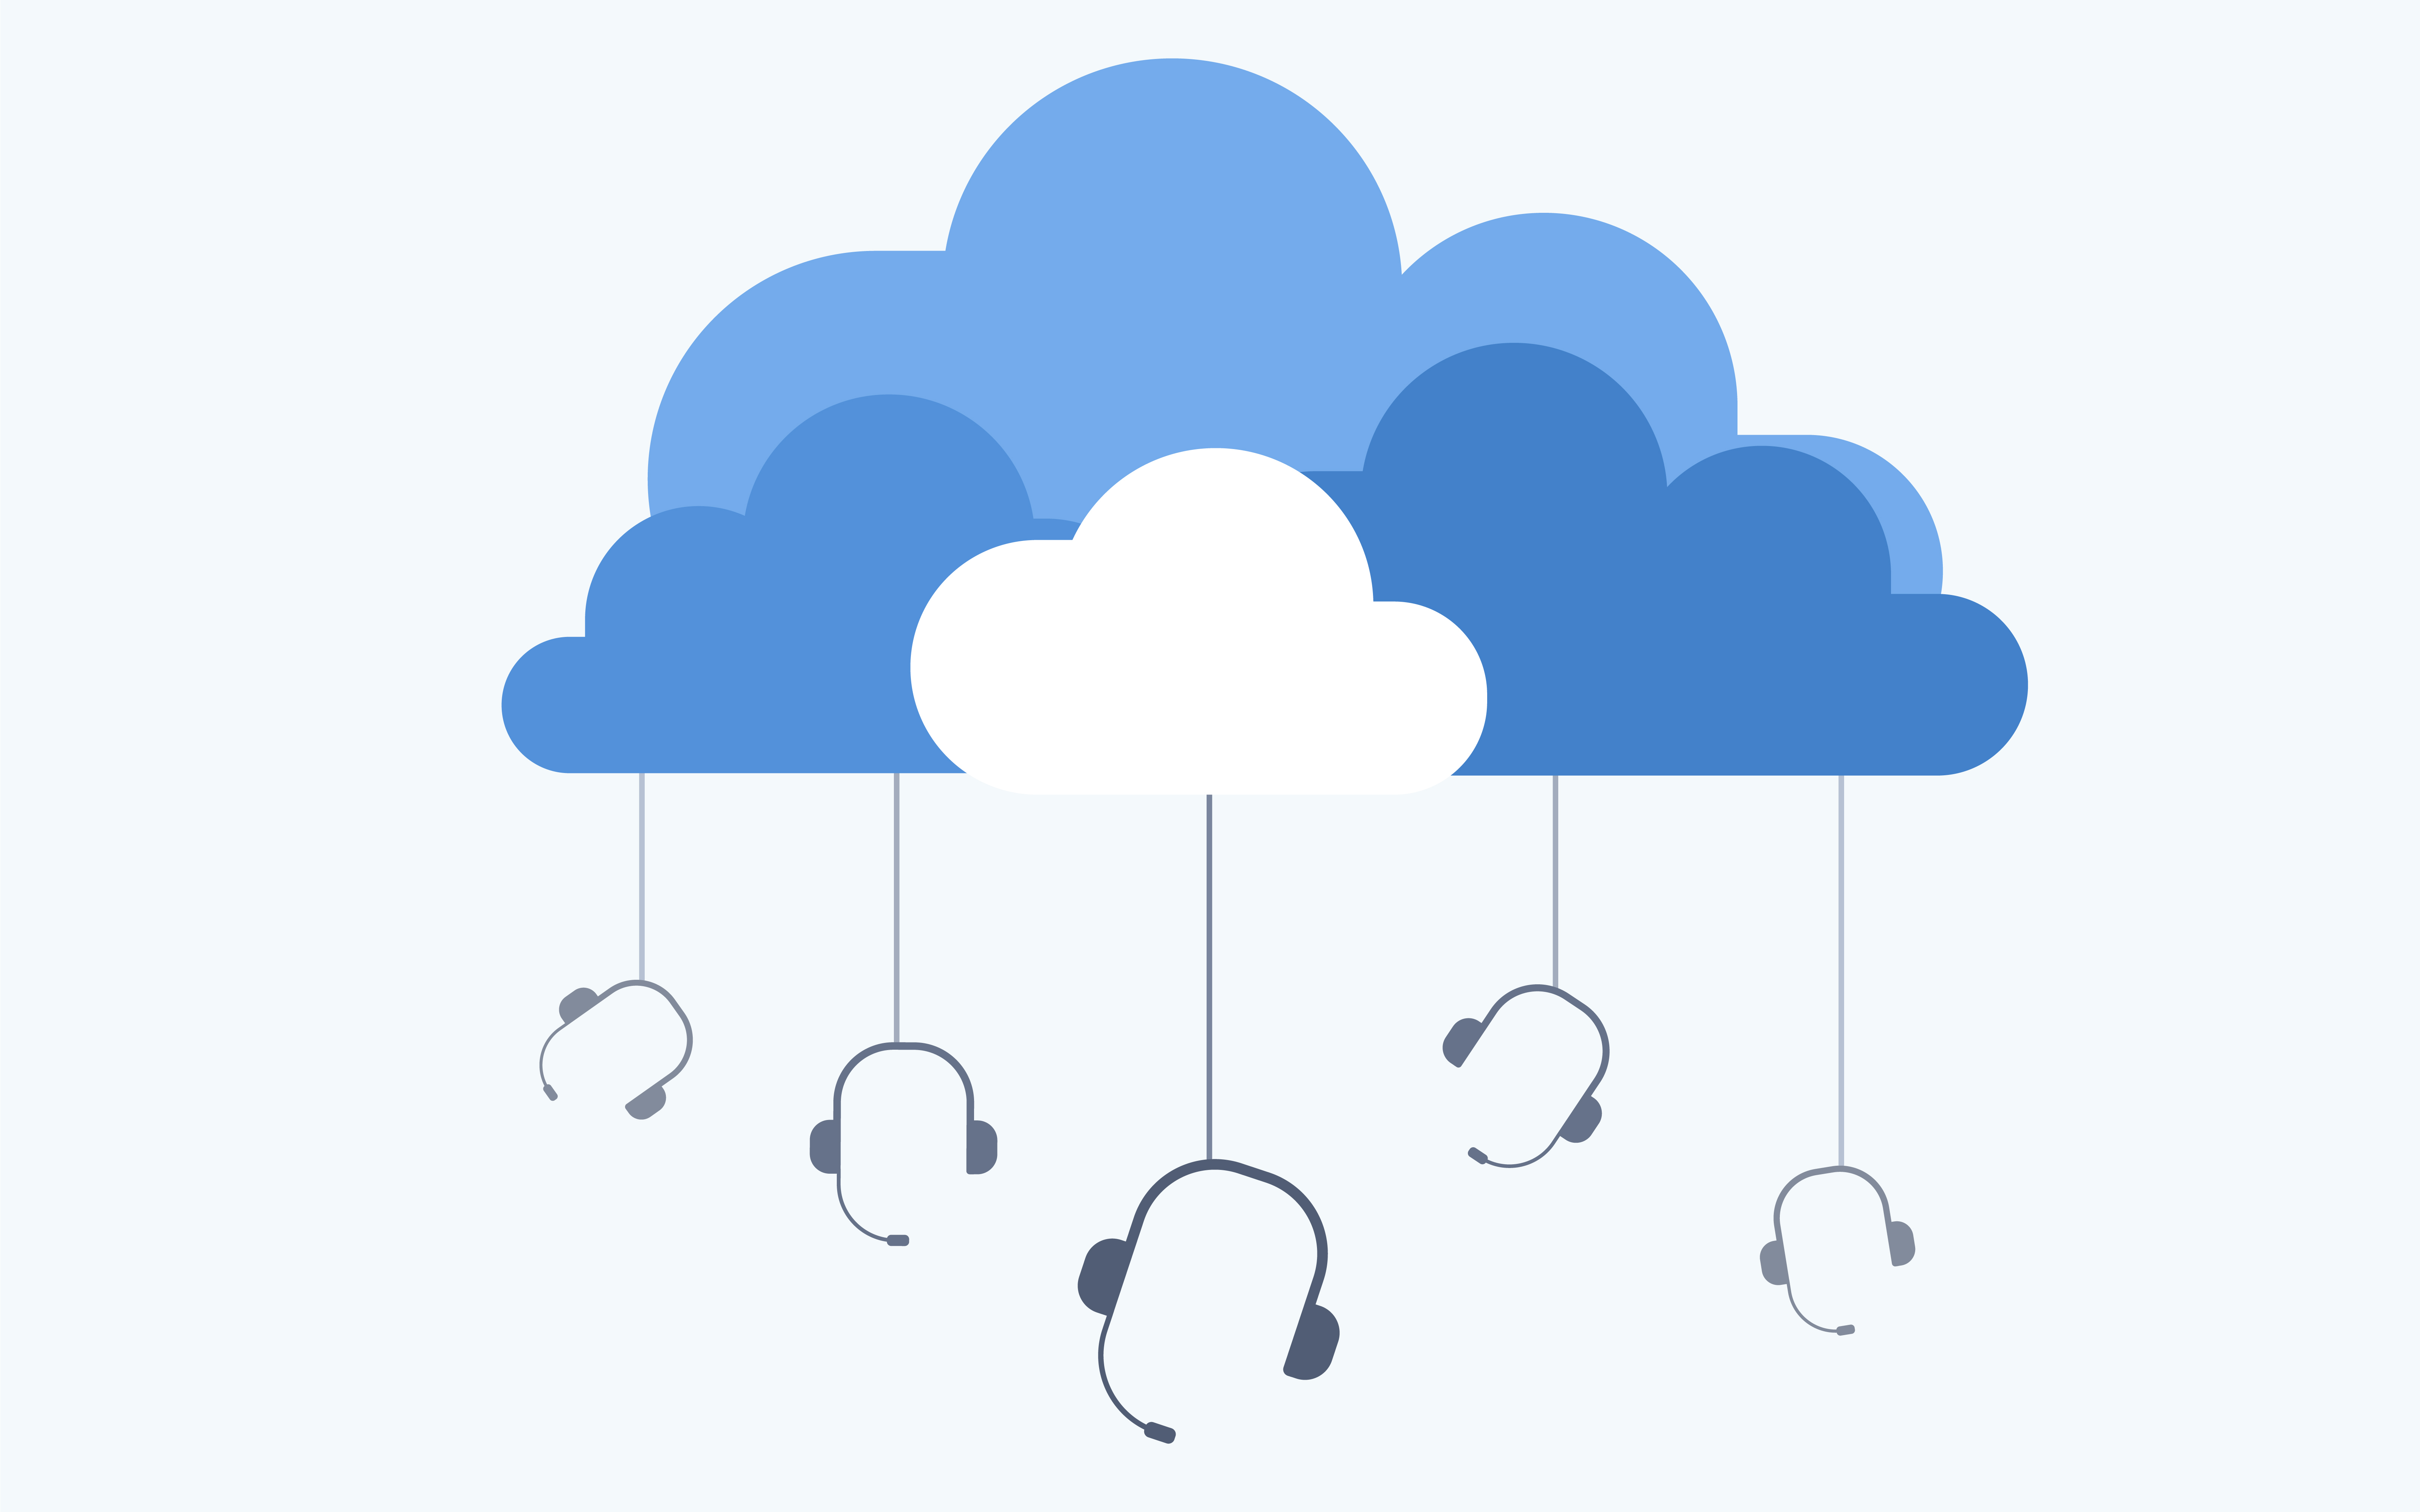 Contact Centers Finding Value in the Cloud